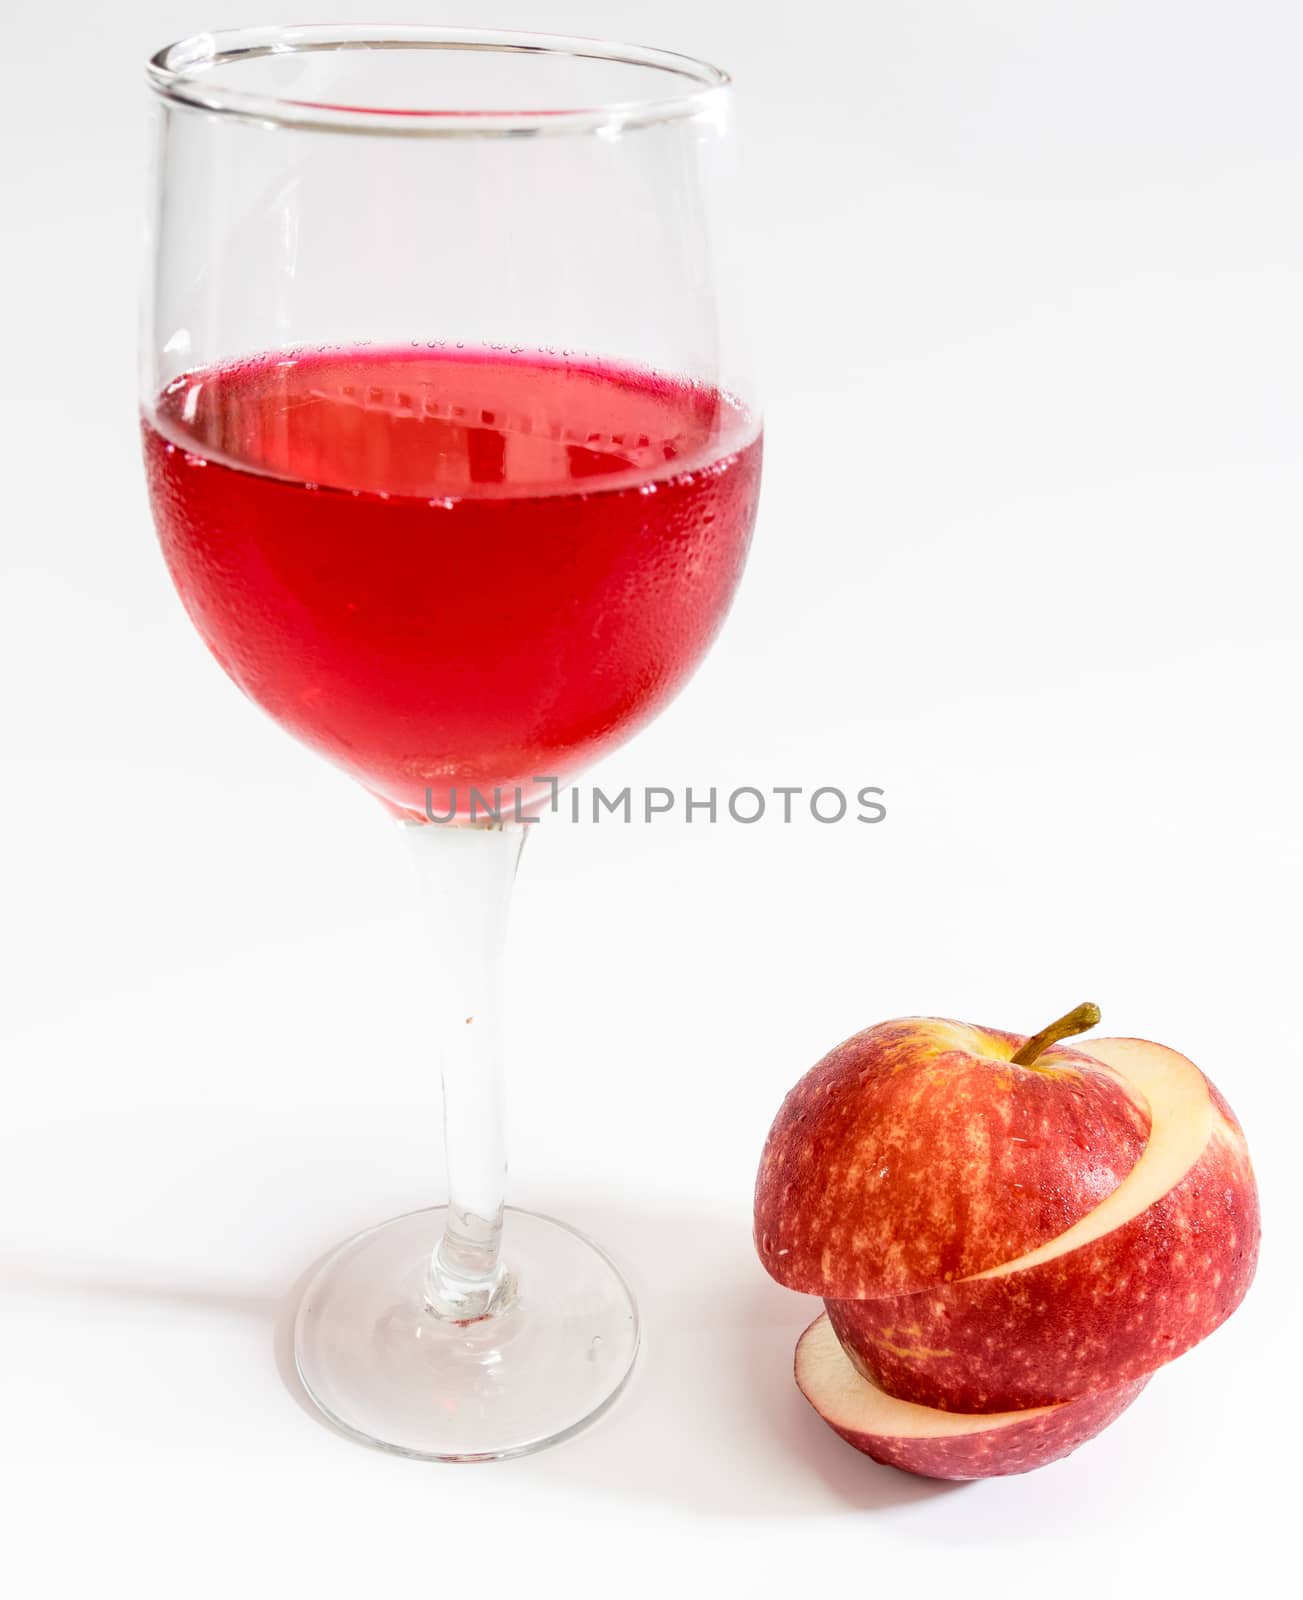 Red apple on white background.